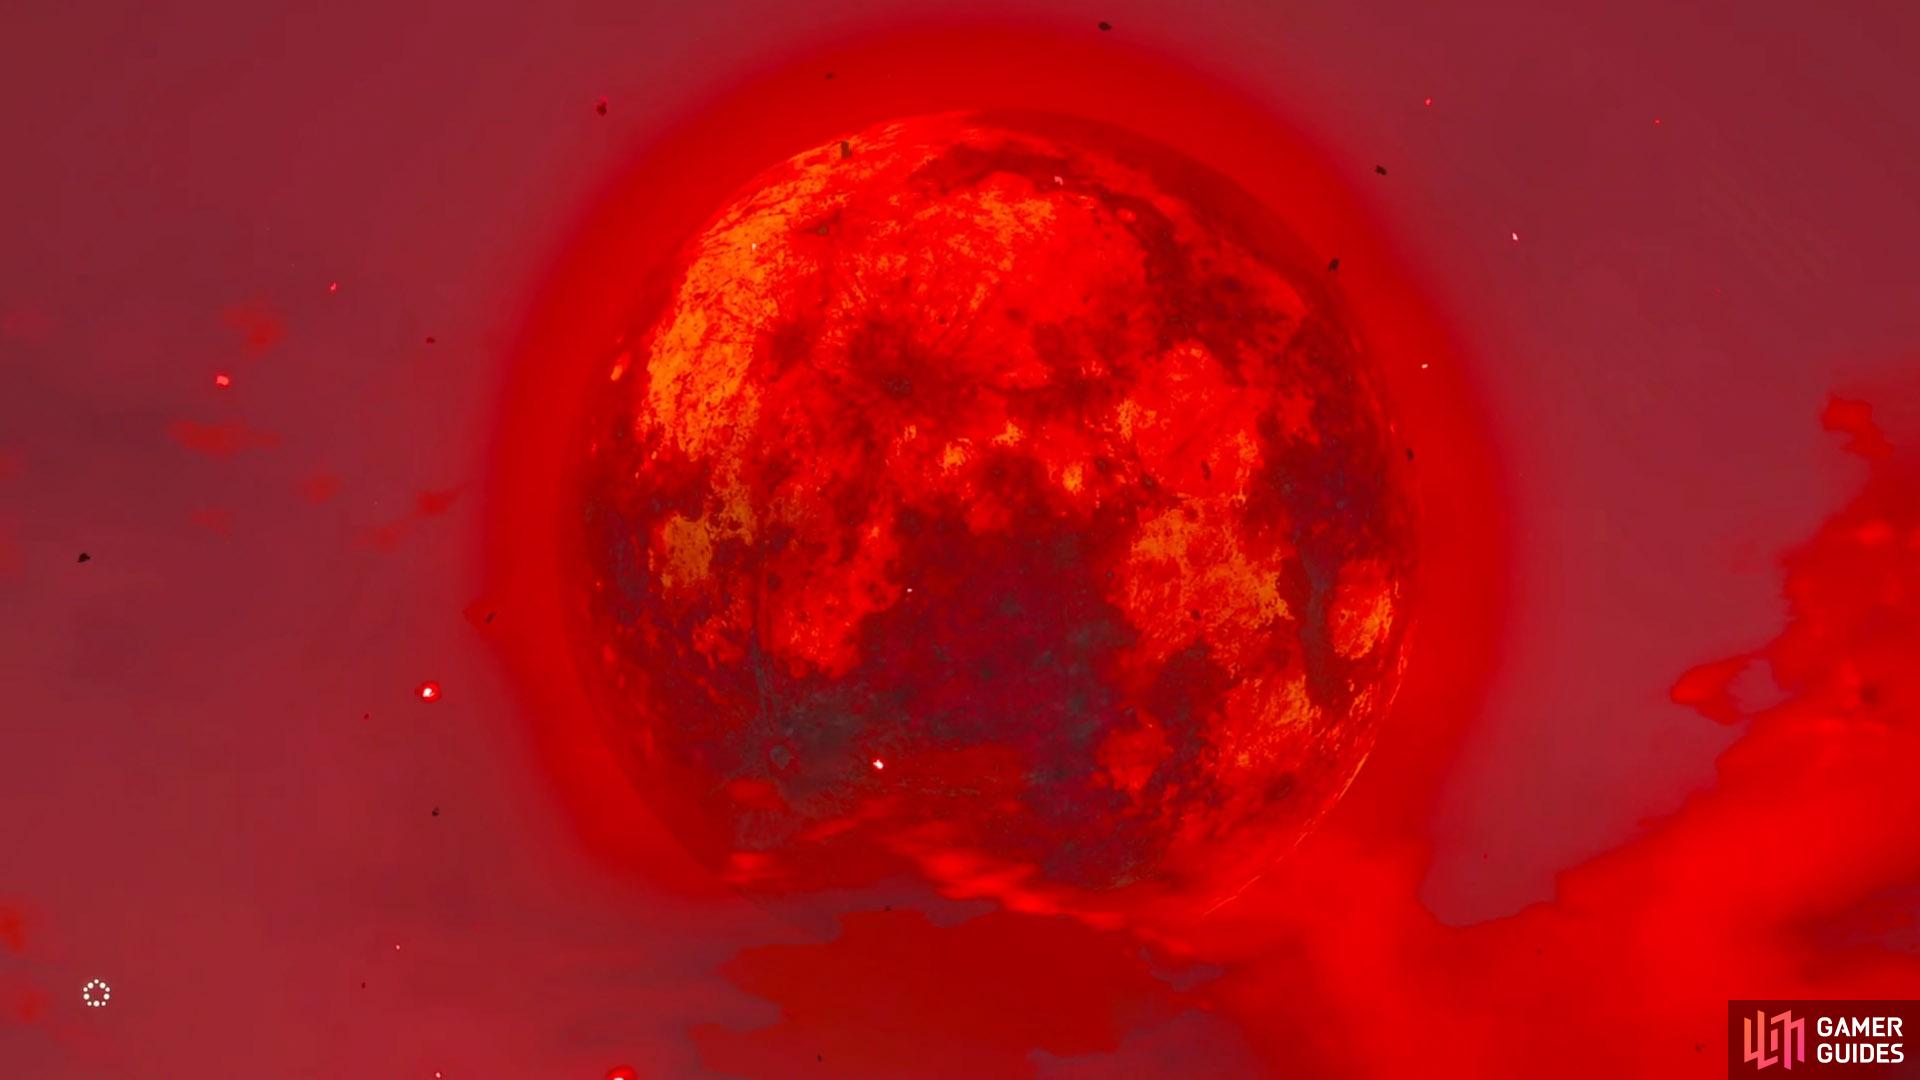 The Blood Moon rising in Tears of the Kingdom